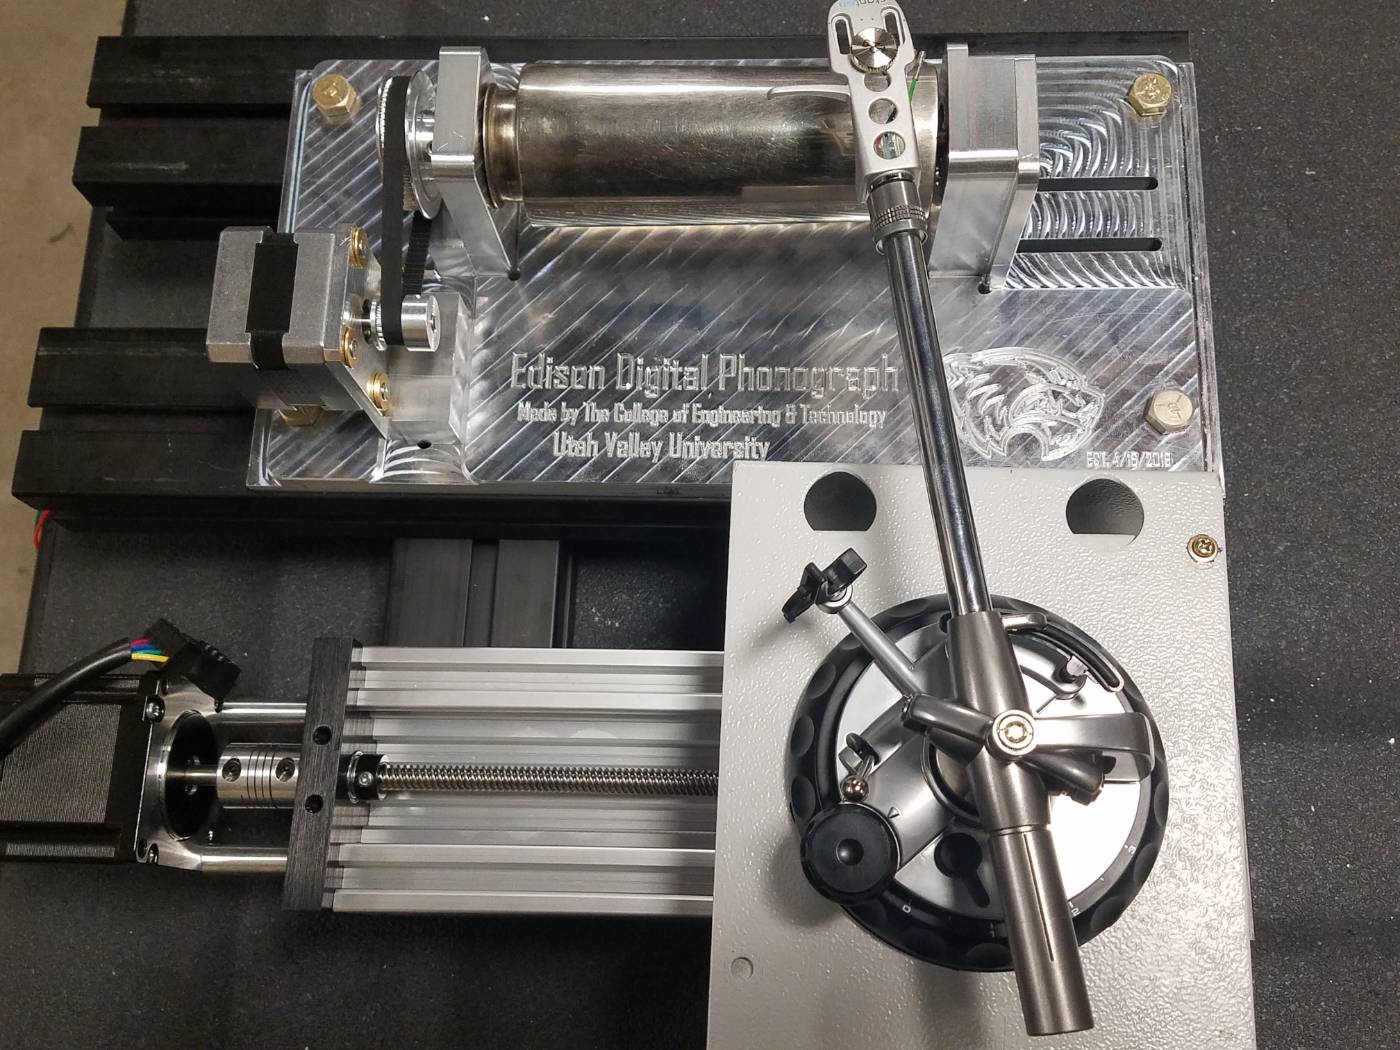 Featured Project in Machine shop